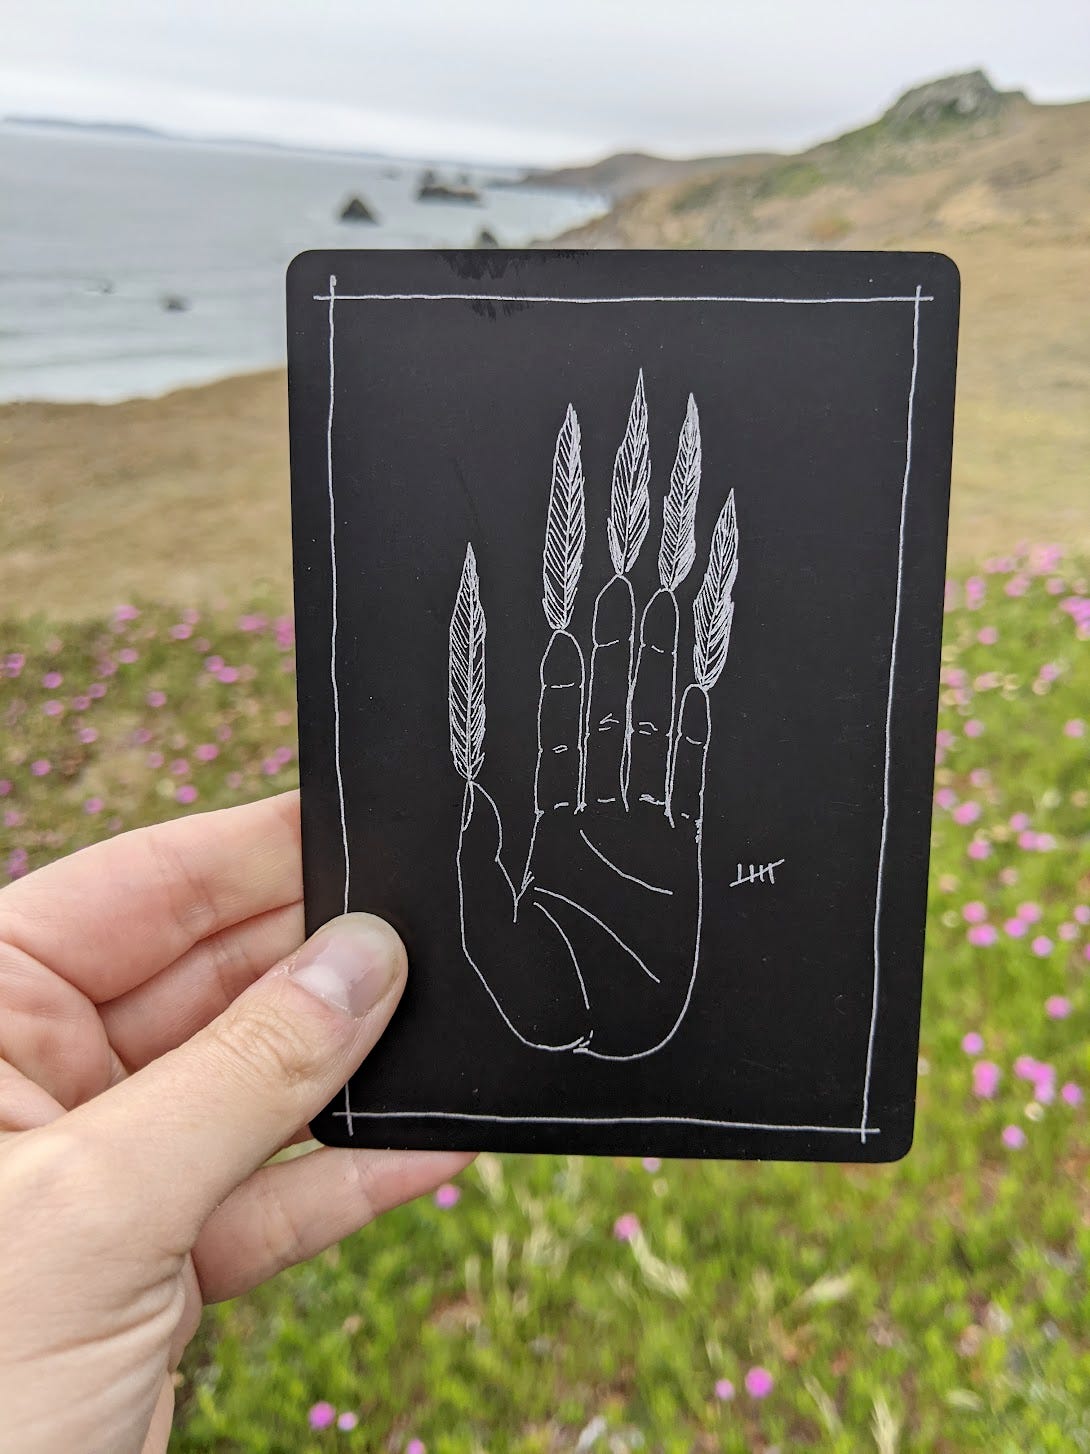 A hand holds up a tarot card from the Wanderer's Tarot deck. The card is black, the Five of Feathers, featuring an illustration of an open palm with a feather extending from each fingertip. The card is being held up outside, and you can see hills and a rocky coastline in the background.